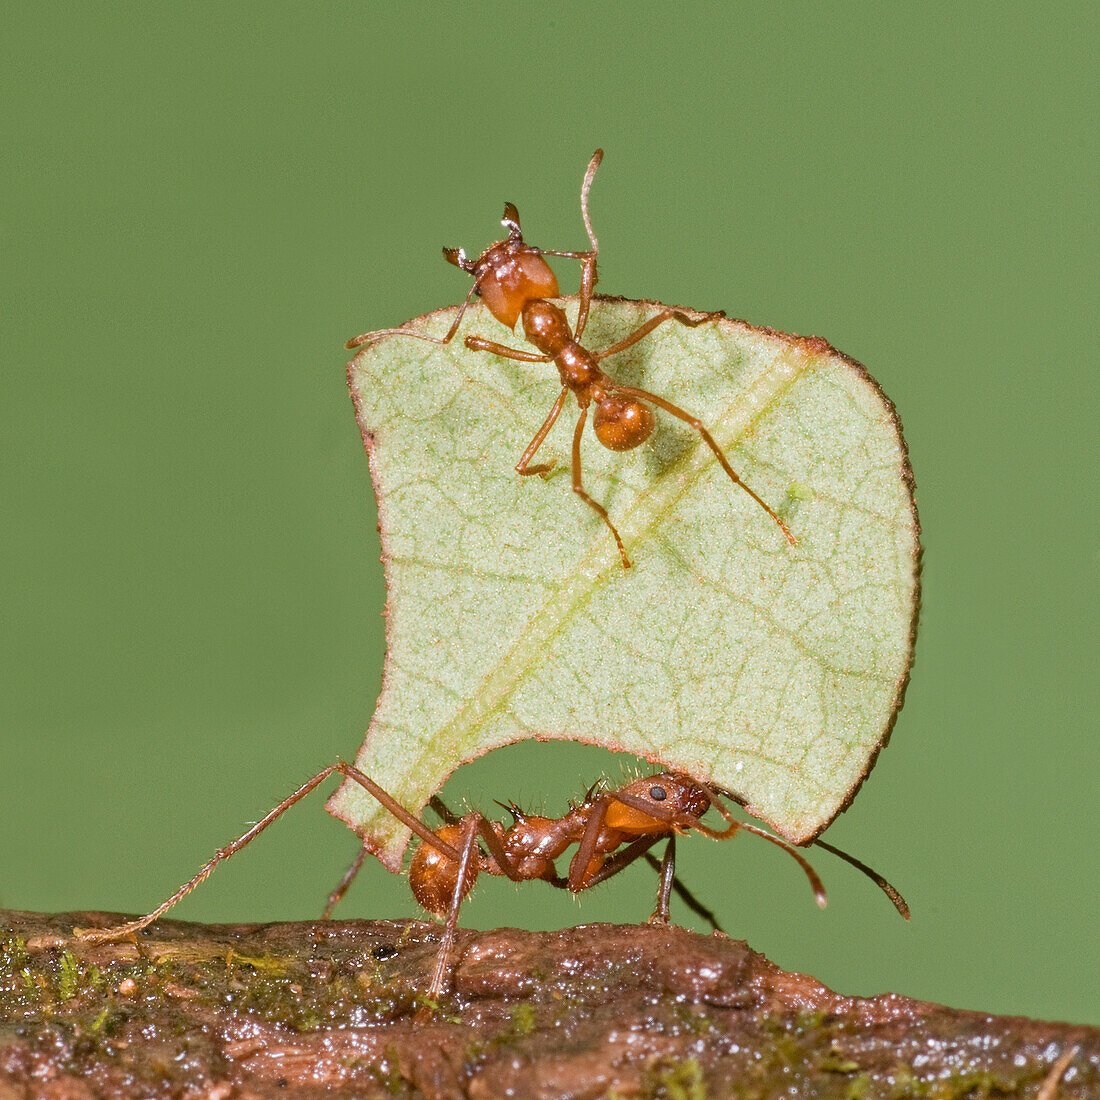 Leafcutter Ant (Atta sp) carrying leaf with guard protecting worker, Costa Rica